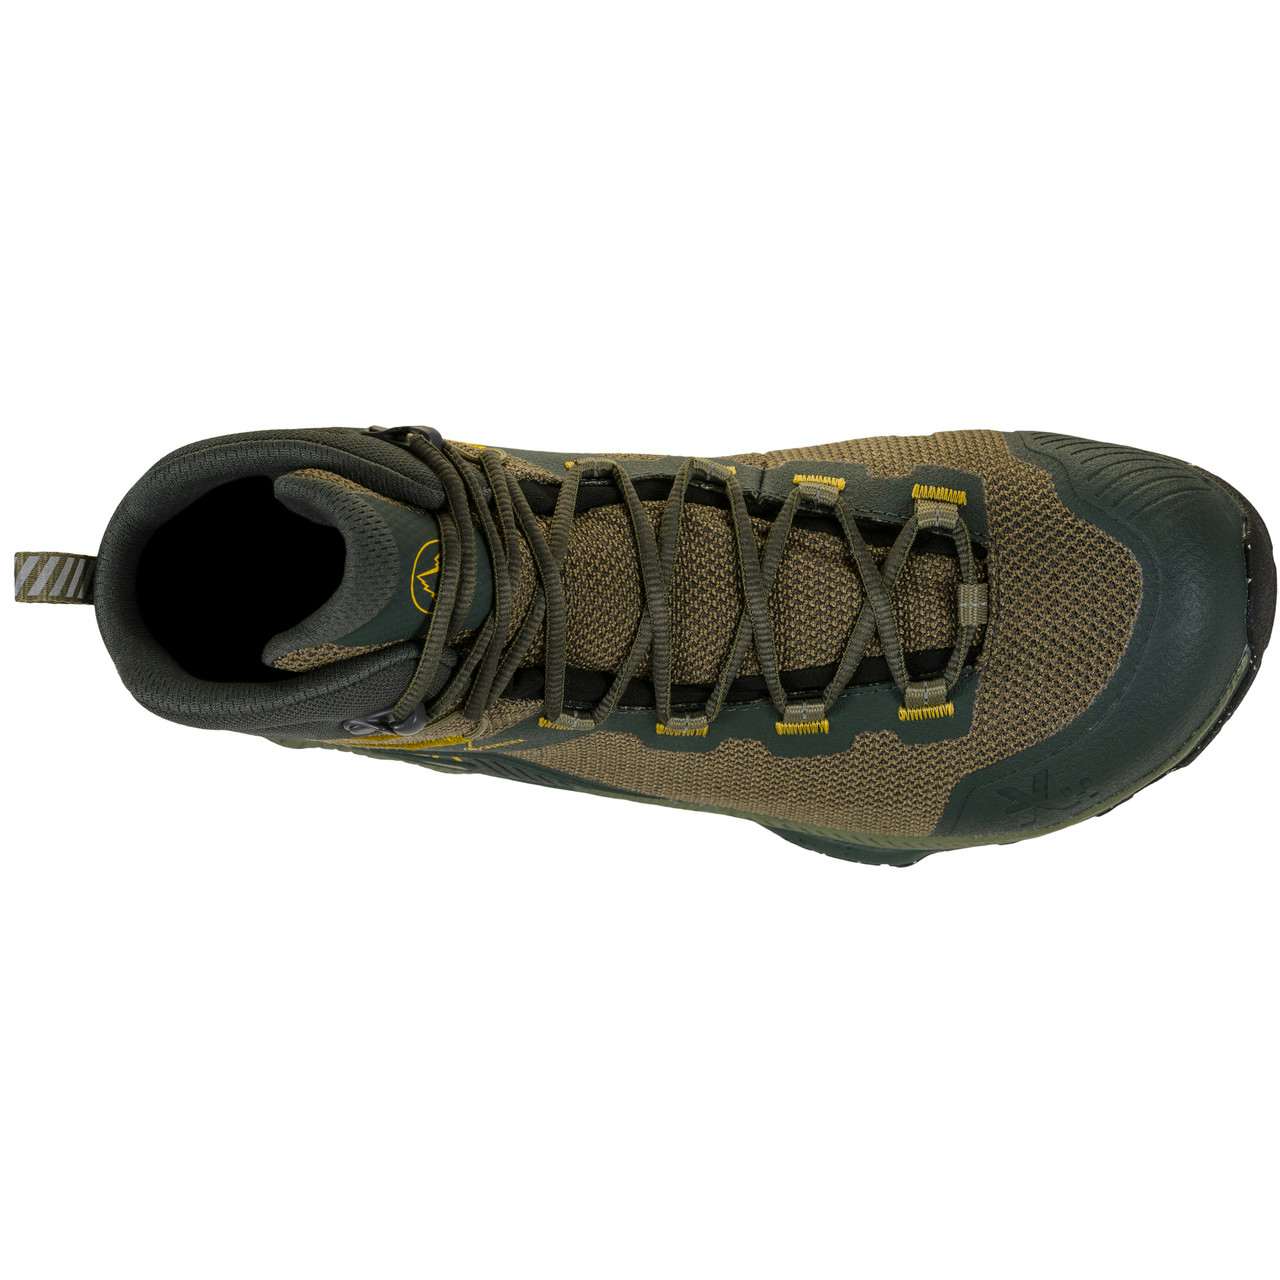 TX Hike Mid Gore-Tex Light Trail Shoes Charcoal/Moss